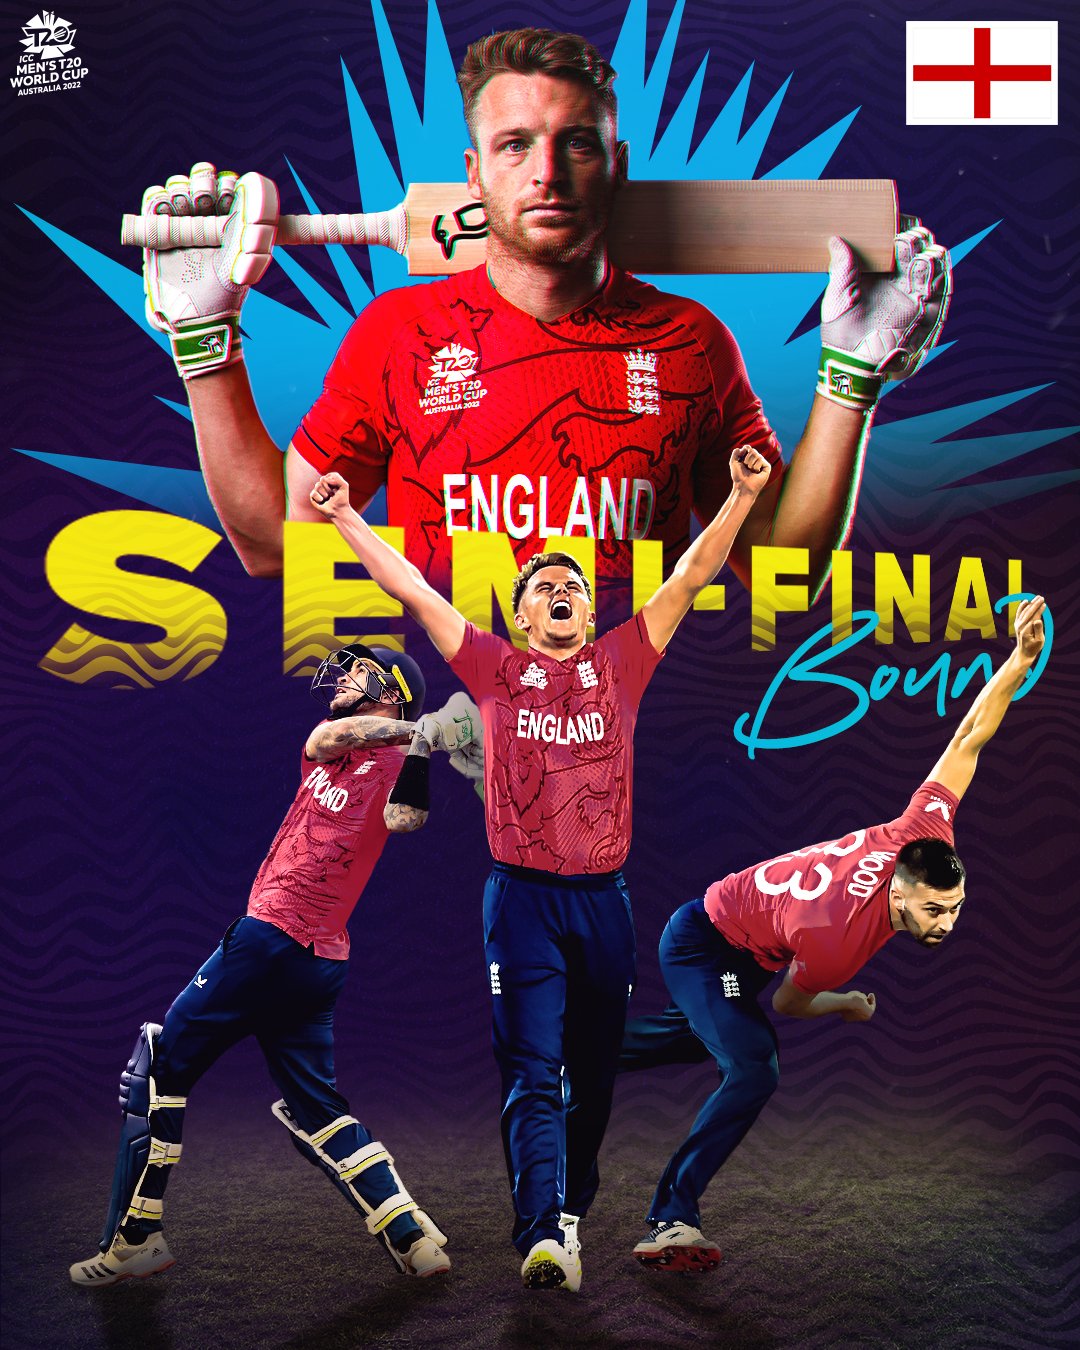 England Team Qualified for Semi Finals in T20 World Cup 2022